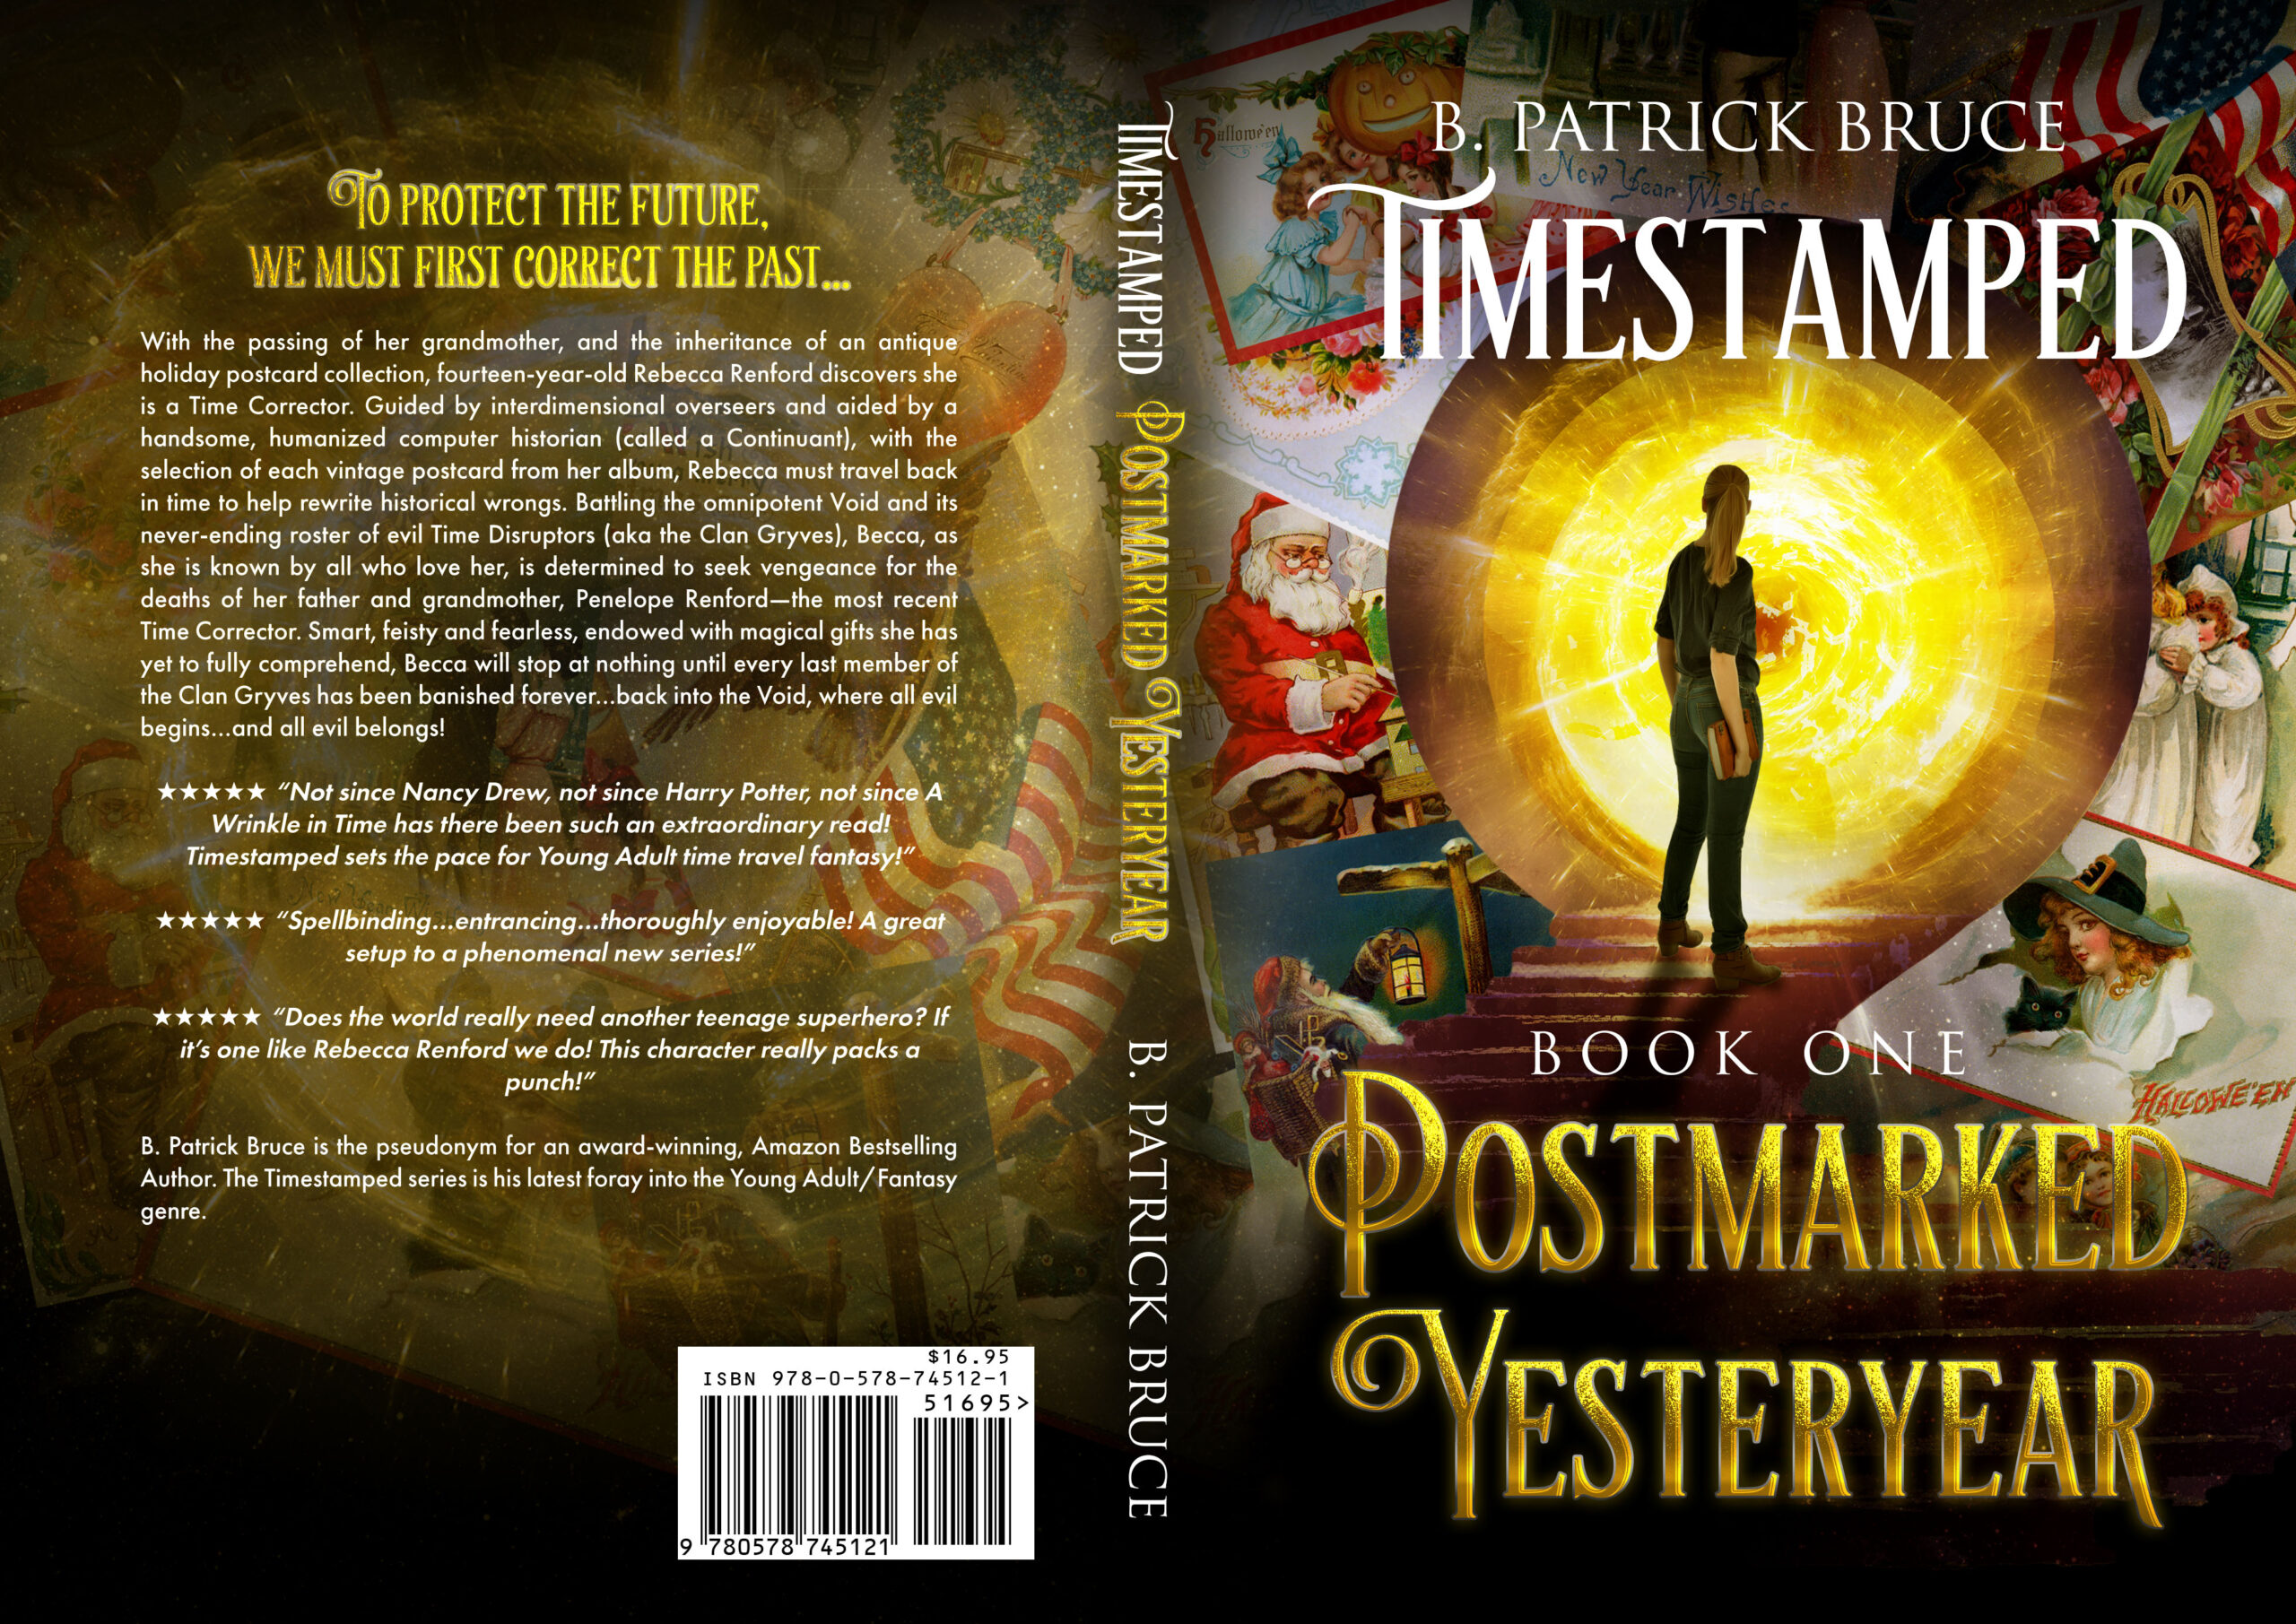 FREE: Timestamped (Book One) Postmarked Yesteryear by B. Patrick Bruce